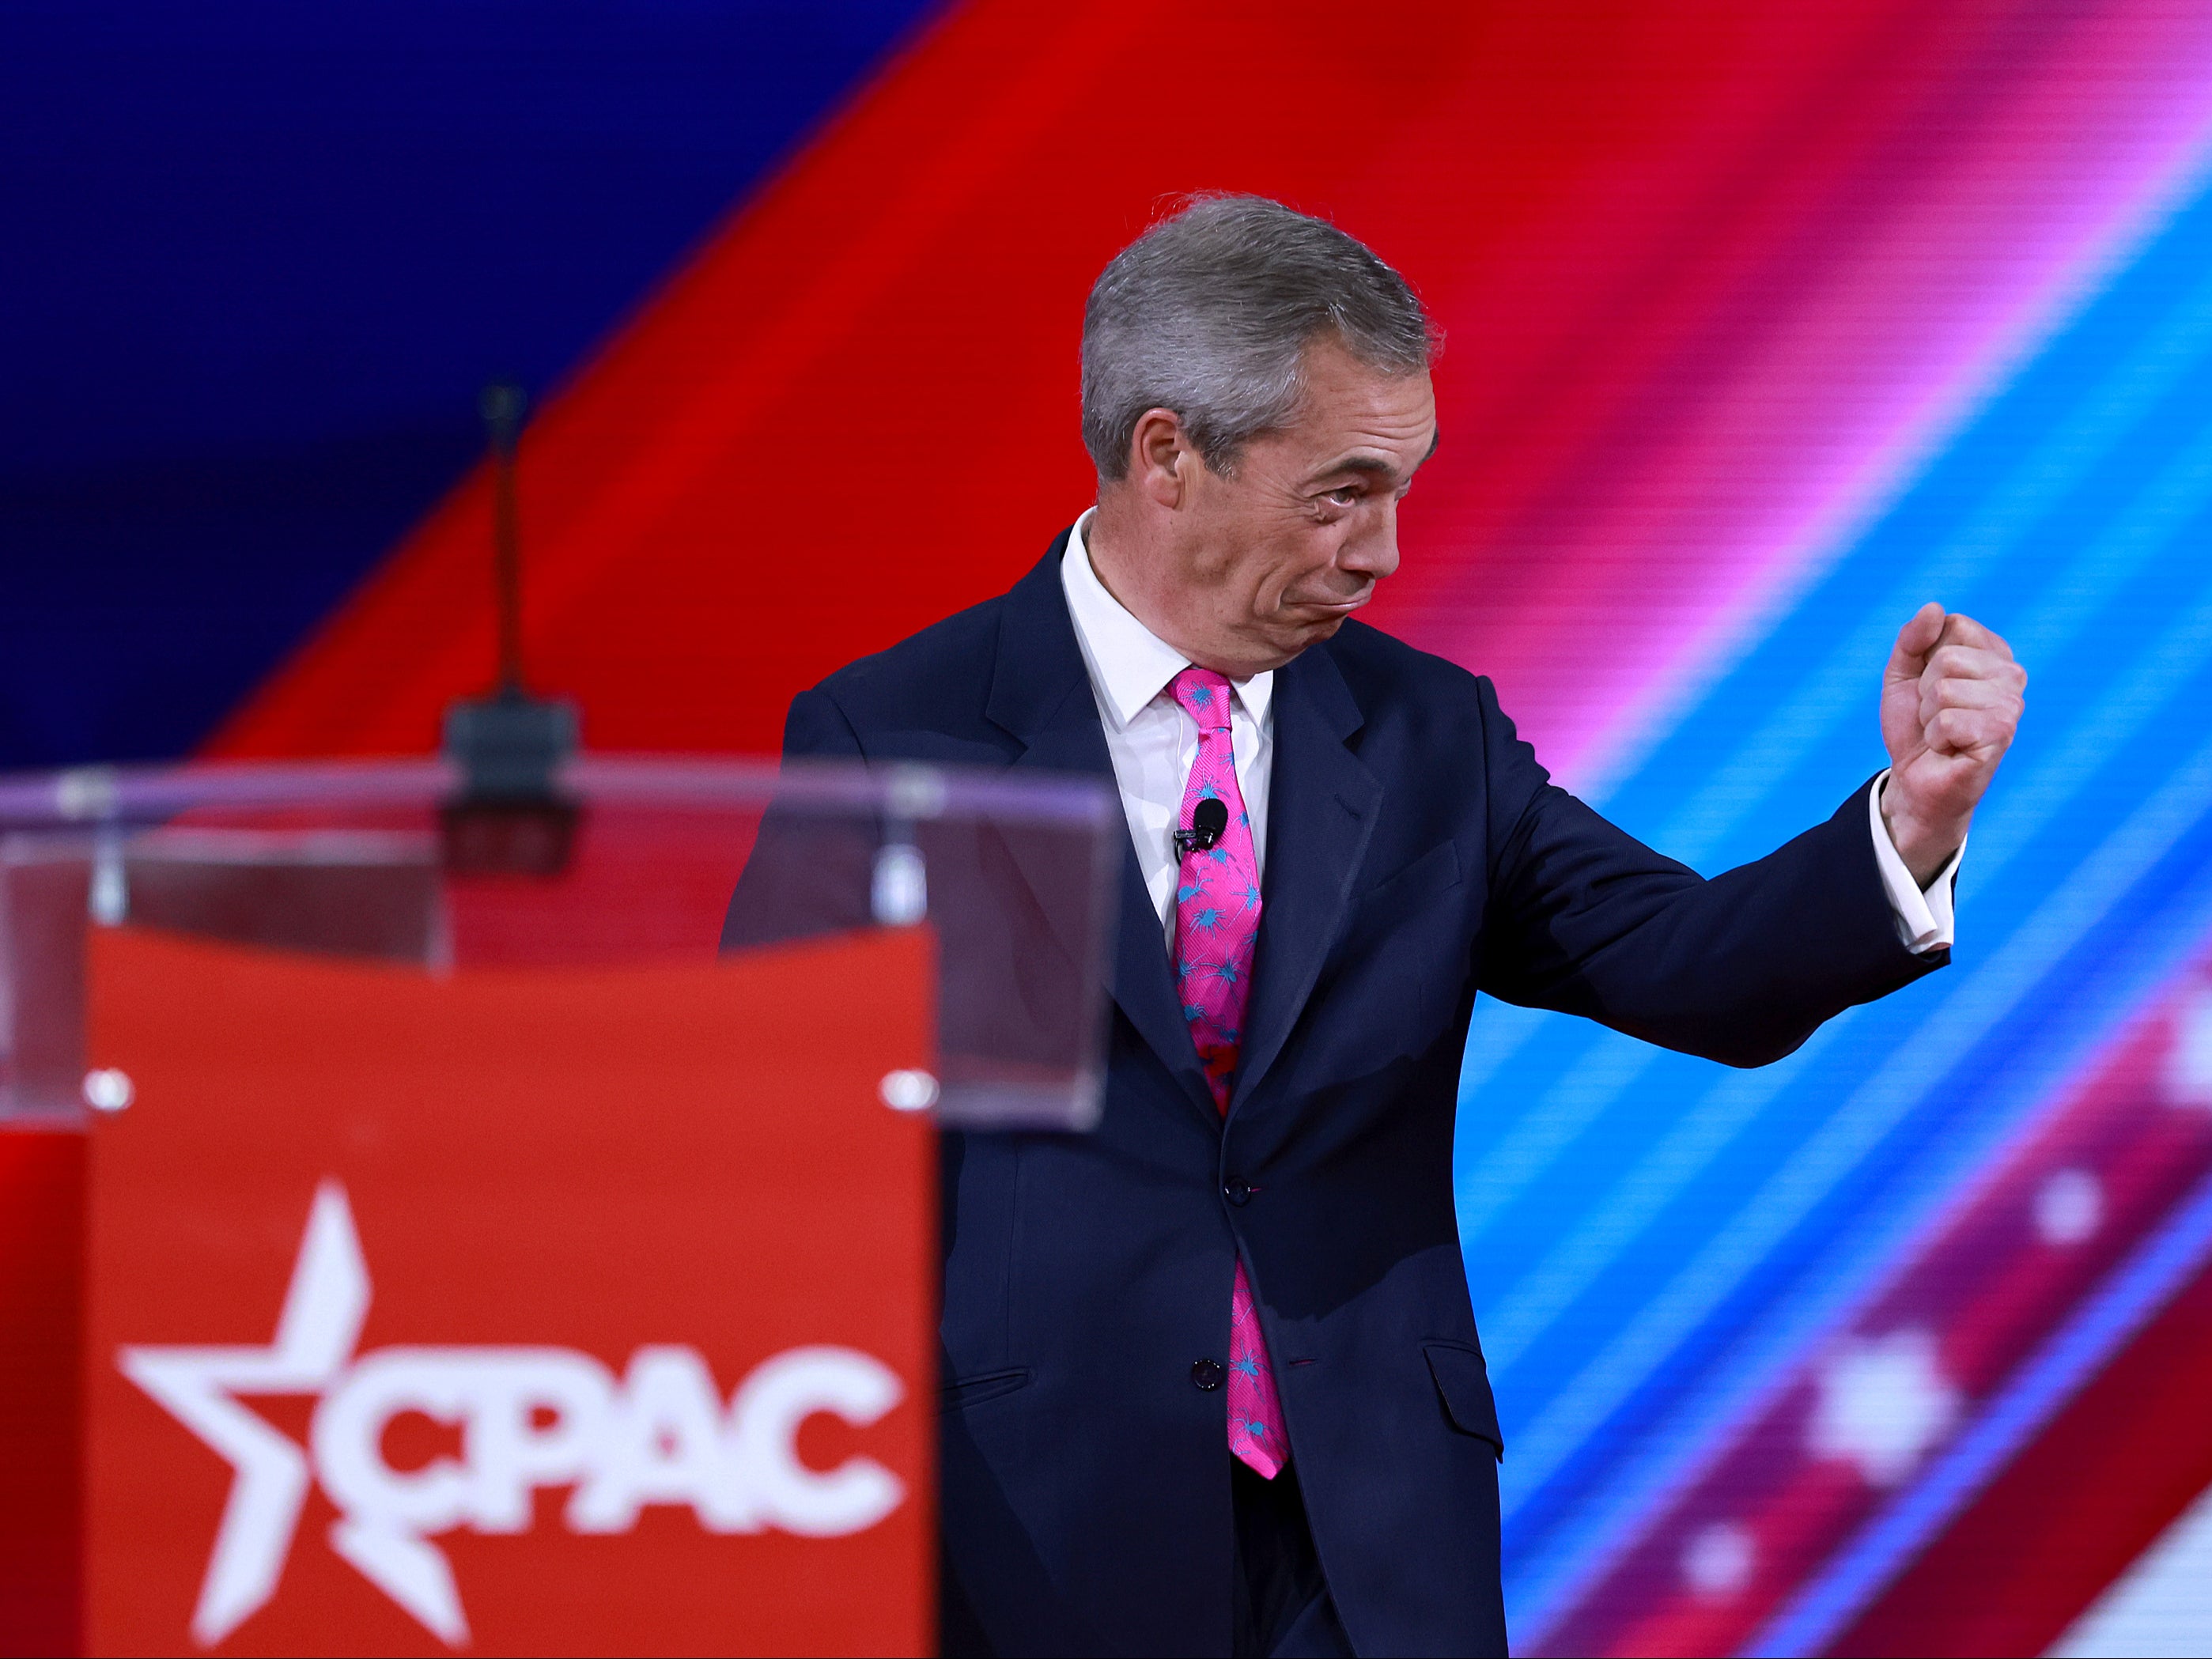 Nigel Farage speaks during the Conservative Political Action Conference (CPAC) on 25 February 2022 in Orlando, Florida